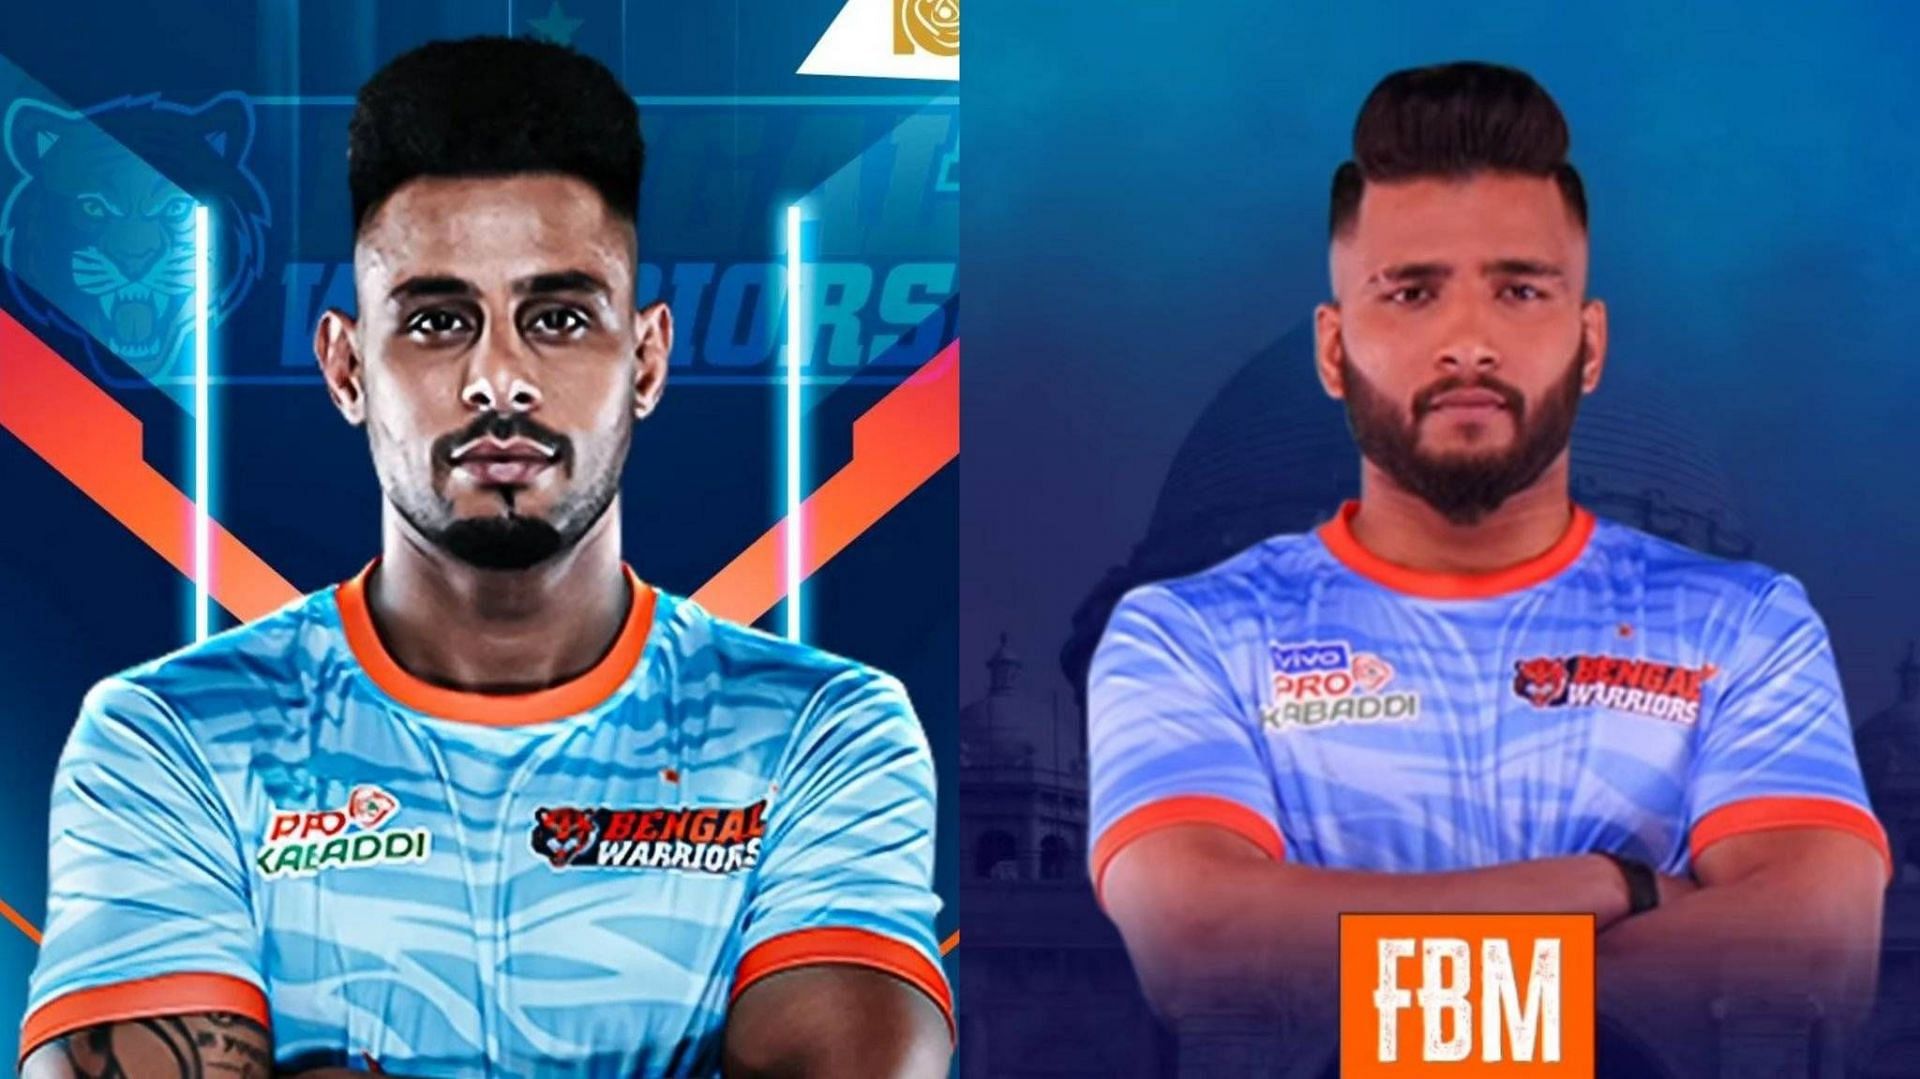 Bengal Warriors used FBM to re-sign Maninder Singh and Shubham Shinde (Image: Instagram)